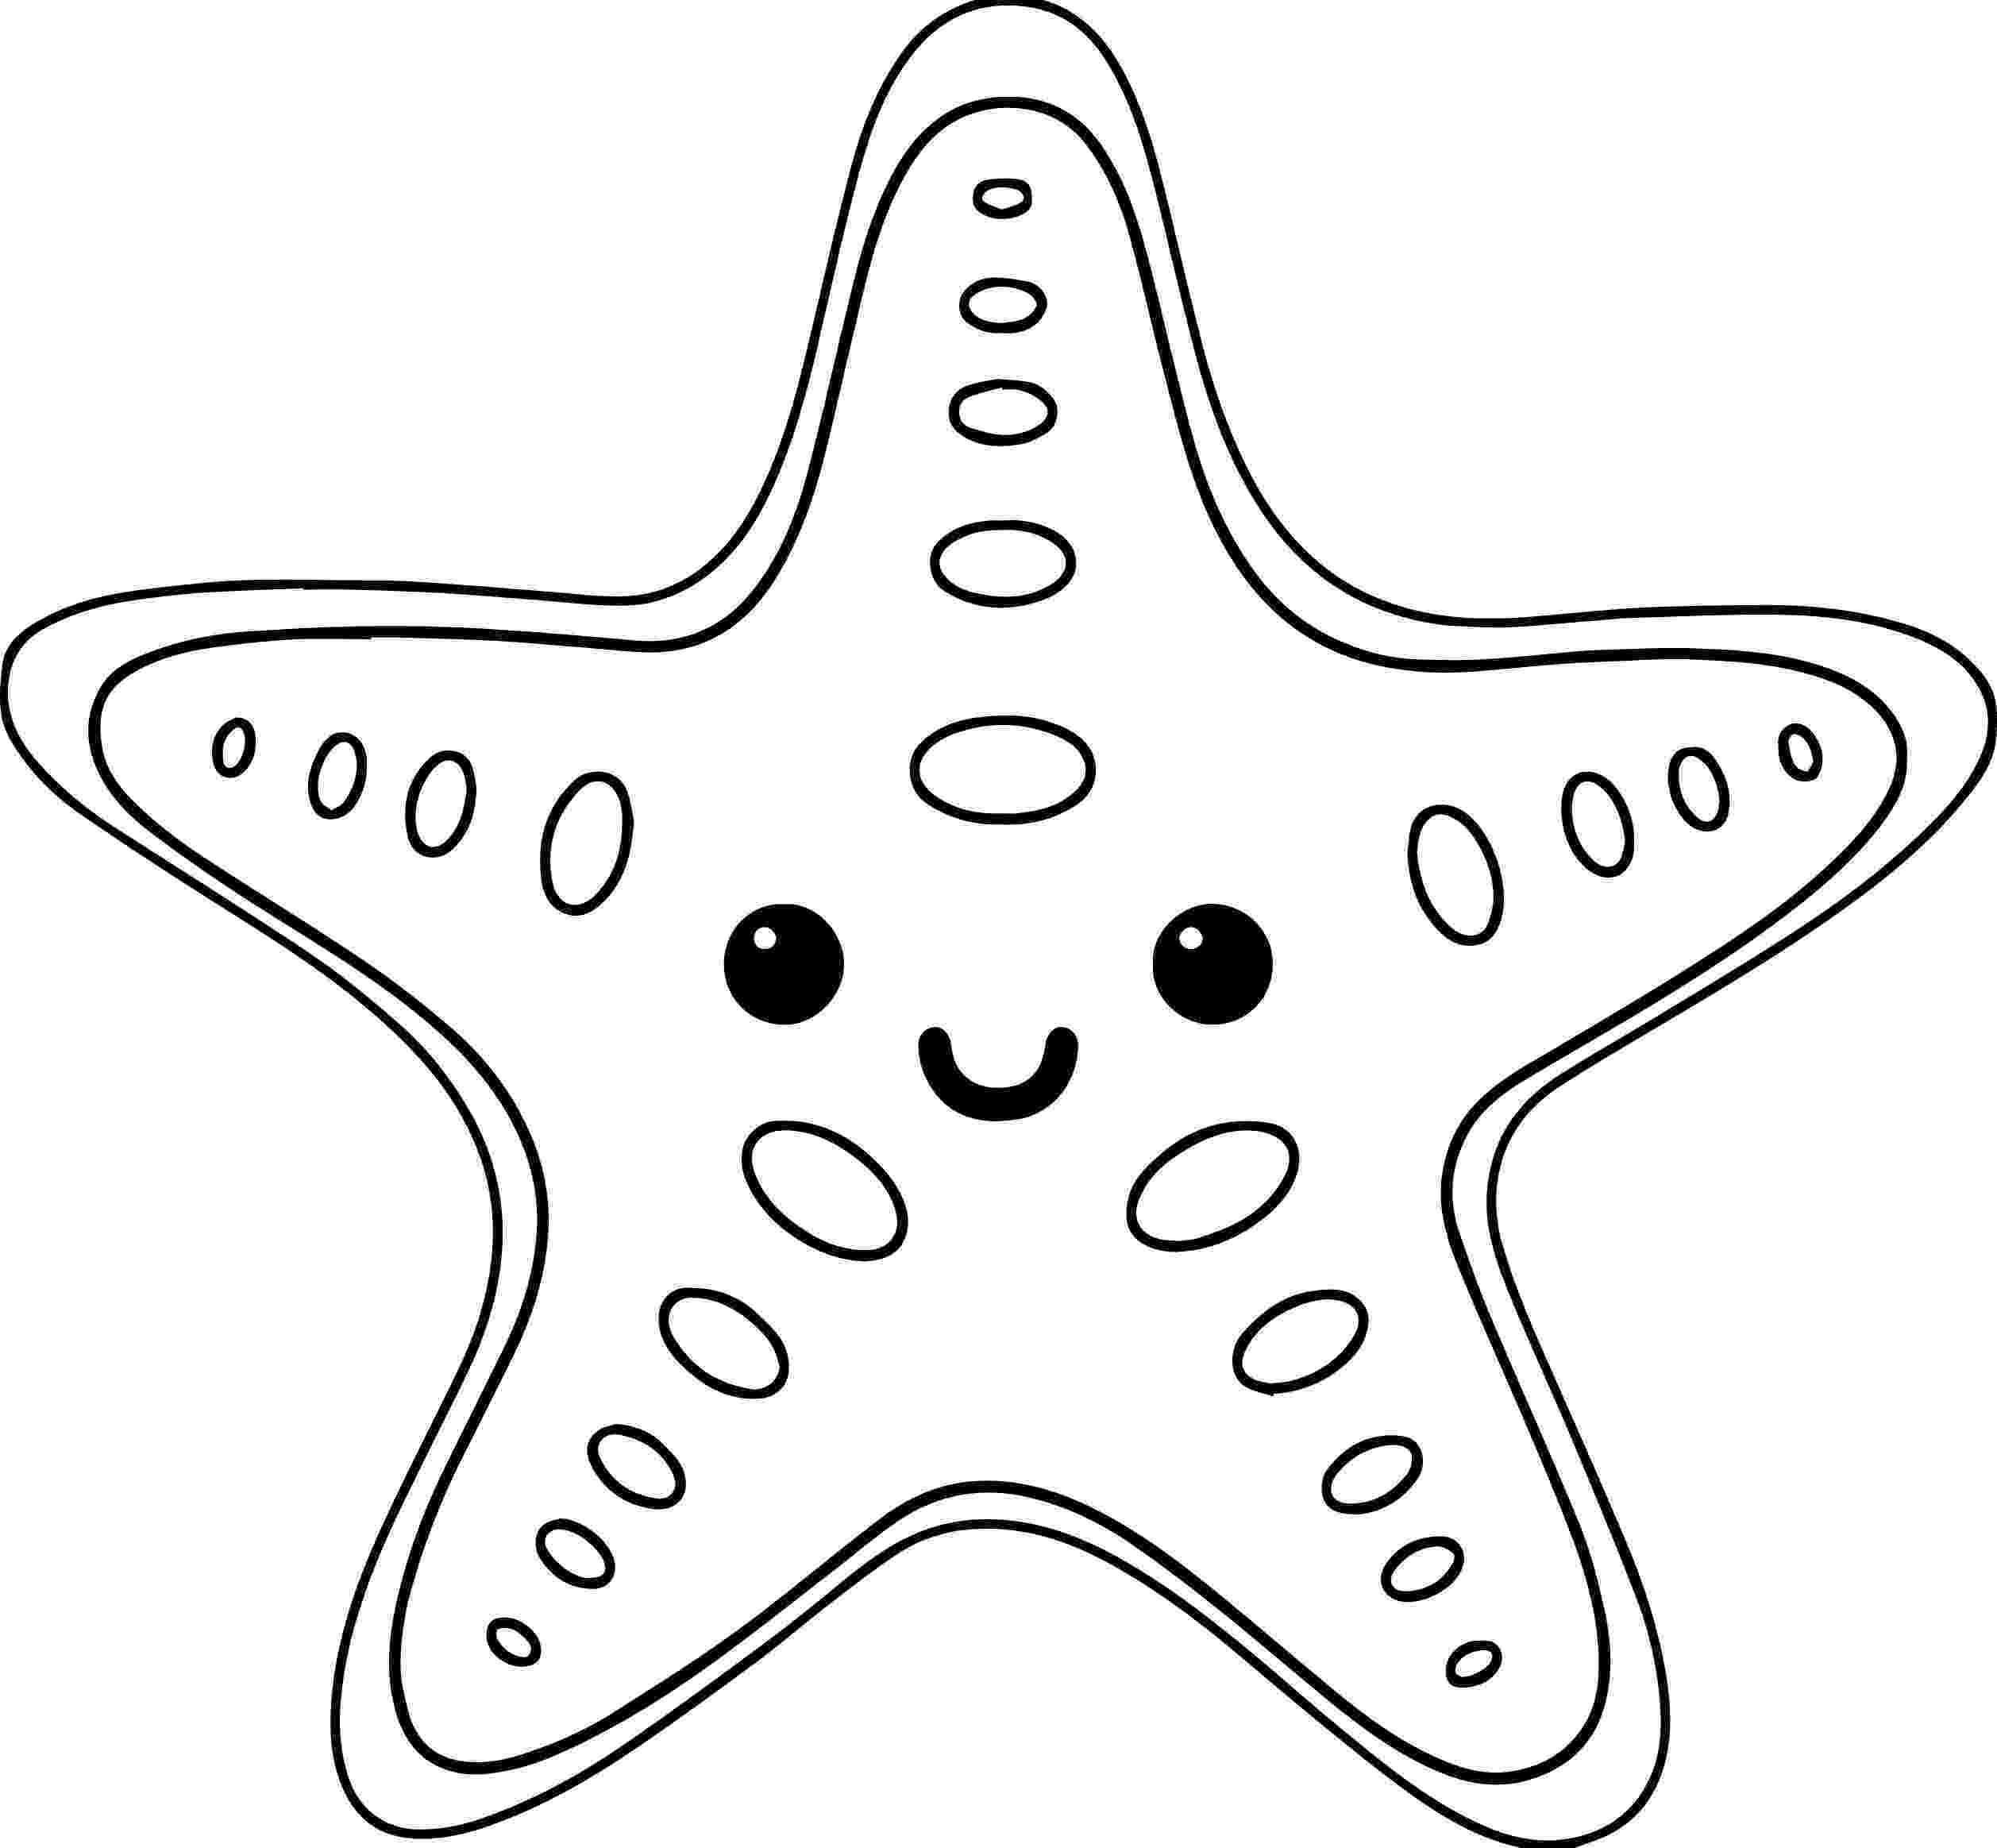 sea star pictures to color starfish coloring pages to download and print for free pictures color star to sea 